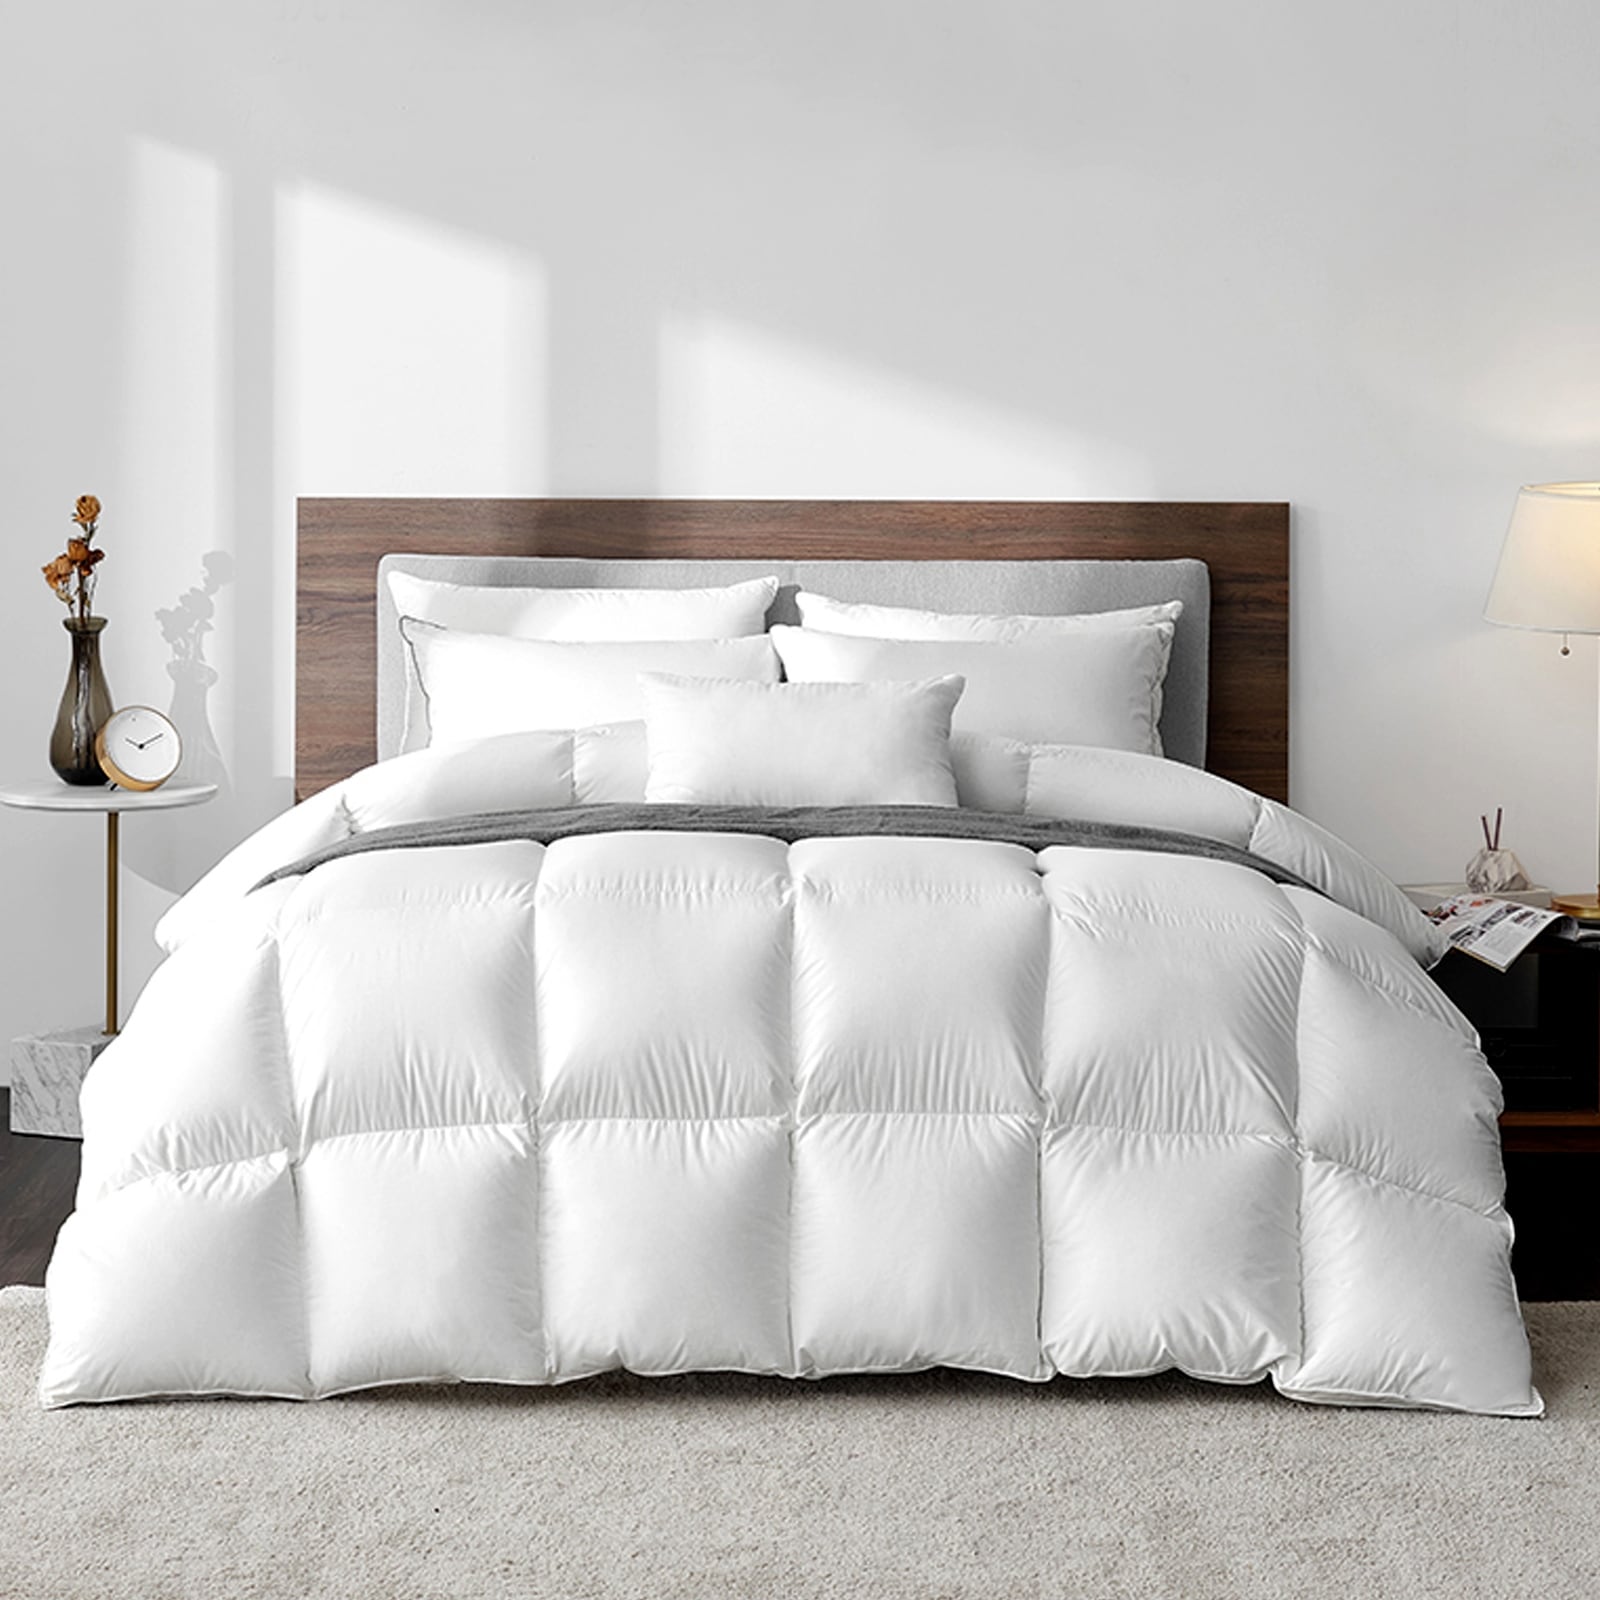 Highland Feather 850 Loft Hungarian White Goose Down Duvet/Comforter 500TC Casing with Corner Ties